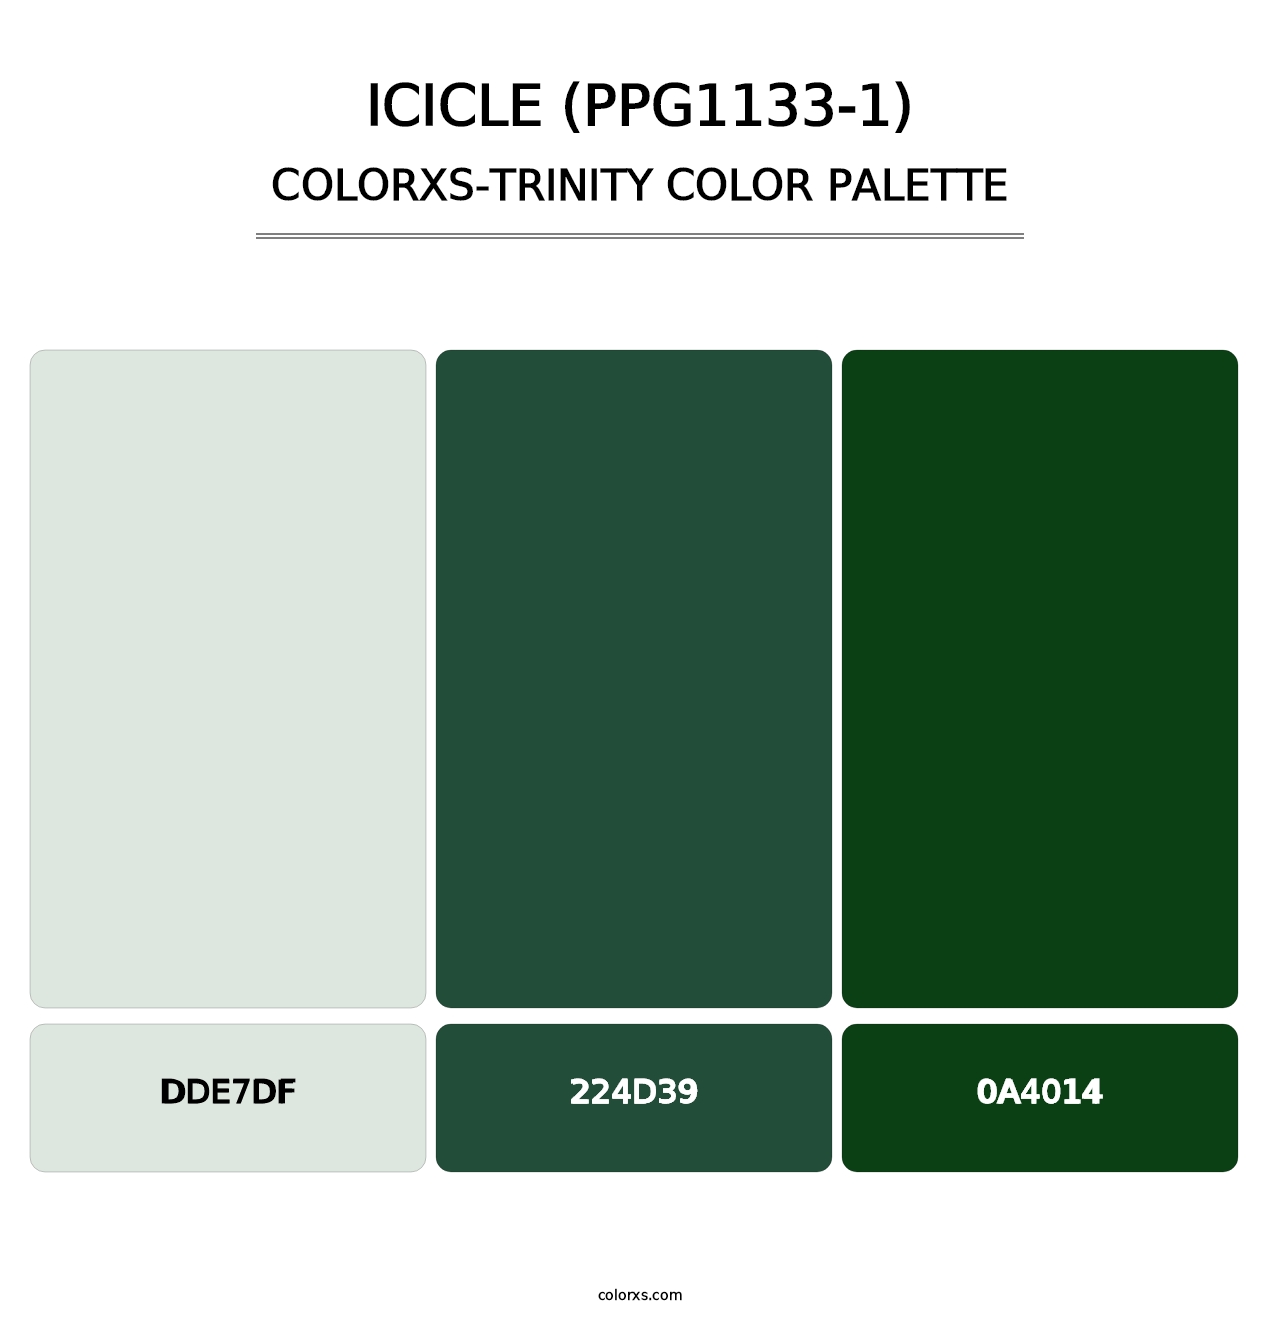 Icicle (PPG1133-1) - Colorxs Trinity Palette